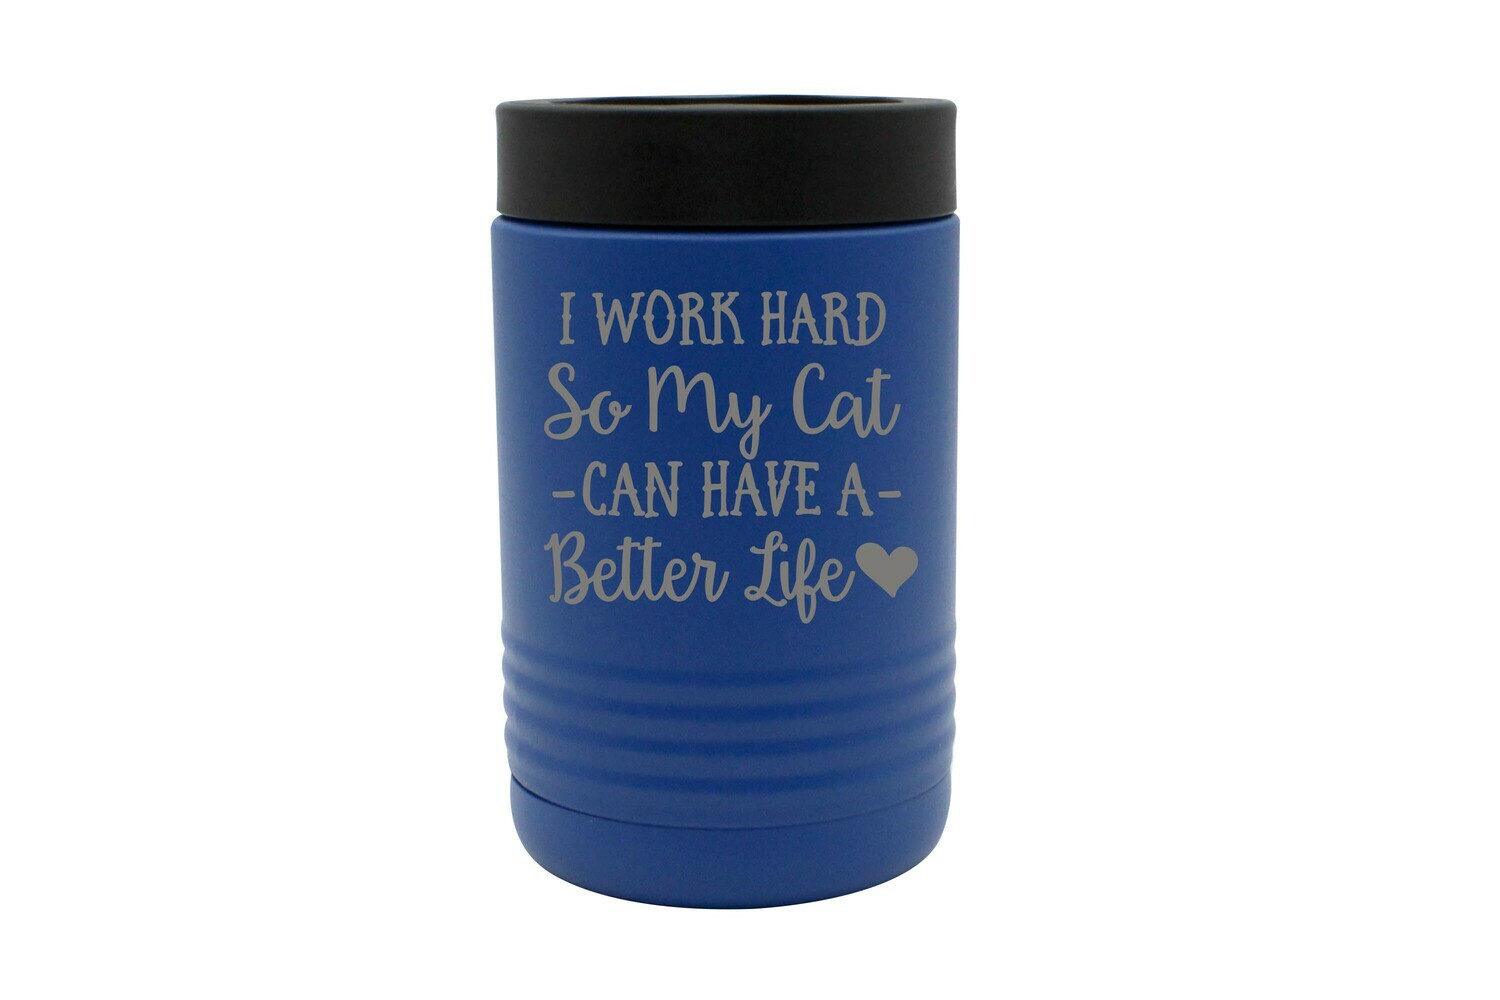 I work hard so my Cat or Dog can have a better life Insulated Beverage Holder